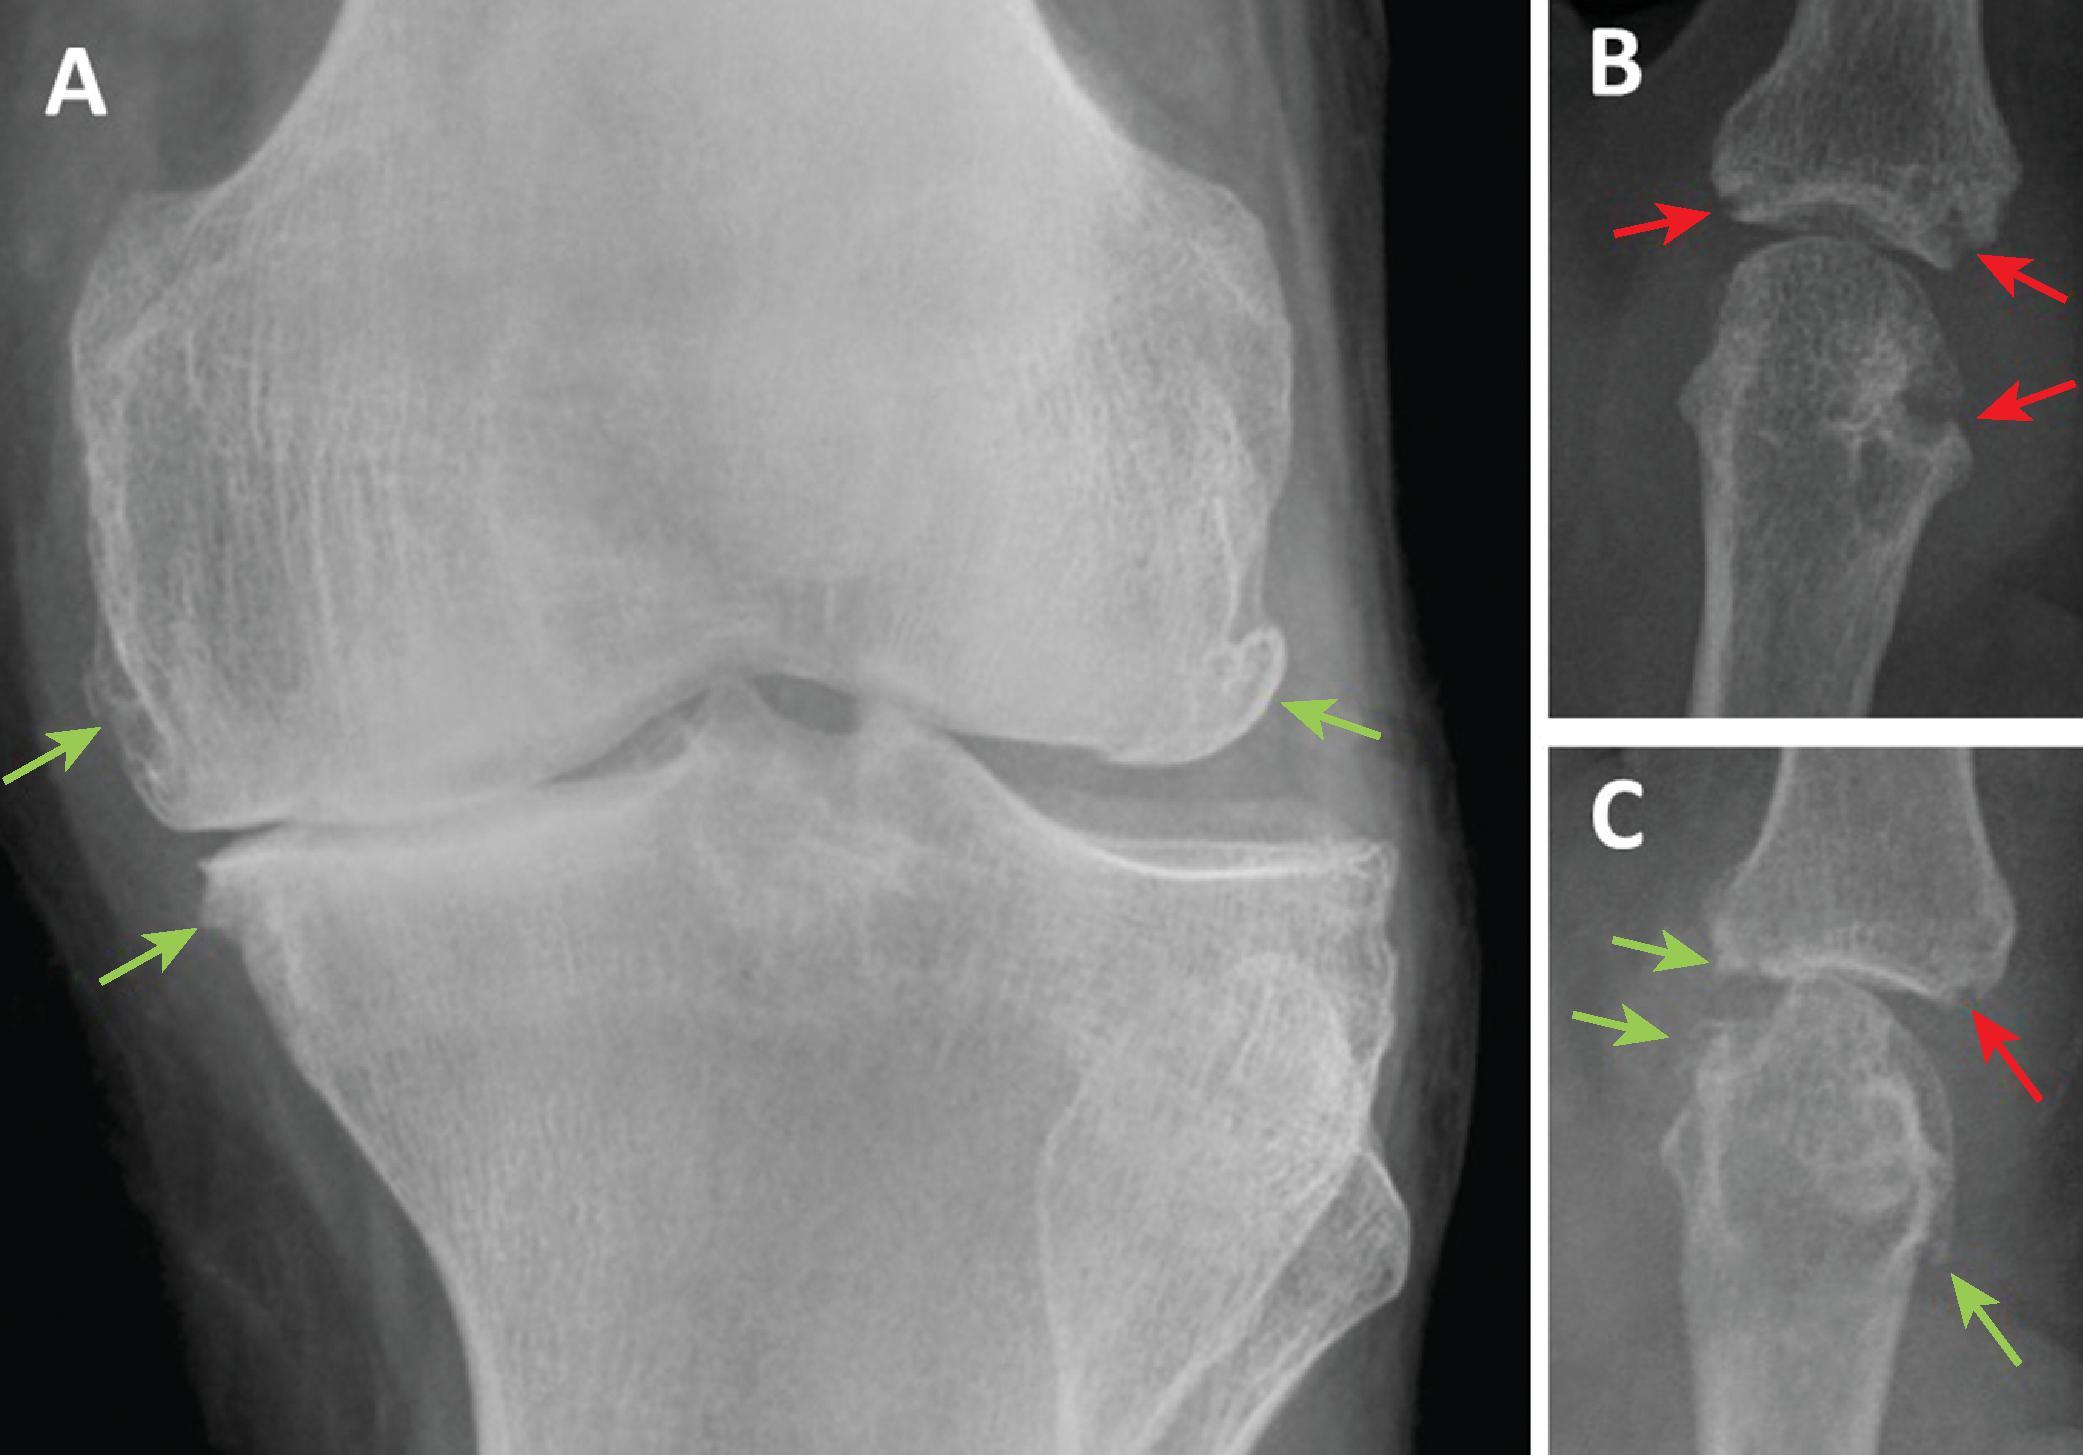 Figure 46.1, Radiographic change in osteoarthritis and rheumatoid arthritis. (A) Posteroanterior radiograph of the knee of a person with structural changes of tibiofemoral osteoarthritis. The lateral joint compartment can be identified by the localization of the fibula. The medial tibiofemoral joint space is narrowed, with marginal osteophytes ( green arrows ) and subchondral sclerosis. (B and C) Plain radiographs of second metacarpophalangeal joints of two people with rheumatoid arthritis. B shows erosive damage ( red arrows ) at joint margins. C displays erosive change also, and more severe joint space narrowing plus marginal osteophytes. It is not possible from plain radiographs to determine whether the individuals concerned were experiencing pain, nor how severe any pain was. The osteoarthritic changes in C may represent comorbid osteoarthritis that preceded the onset of rheumatoid arthritis or may show secondary osteoarthritis following earlier erosive damage. Disease modifying treatments may reduce the progression of erosive damage in rheumatoid arthritis but do not always eliminate pain.